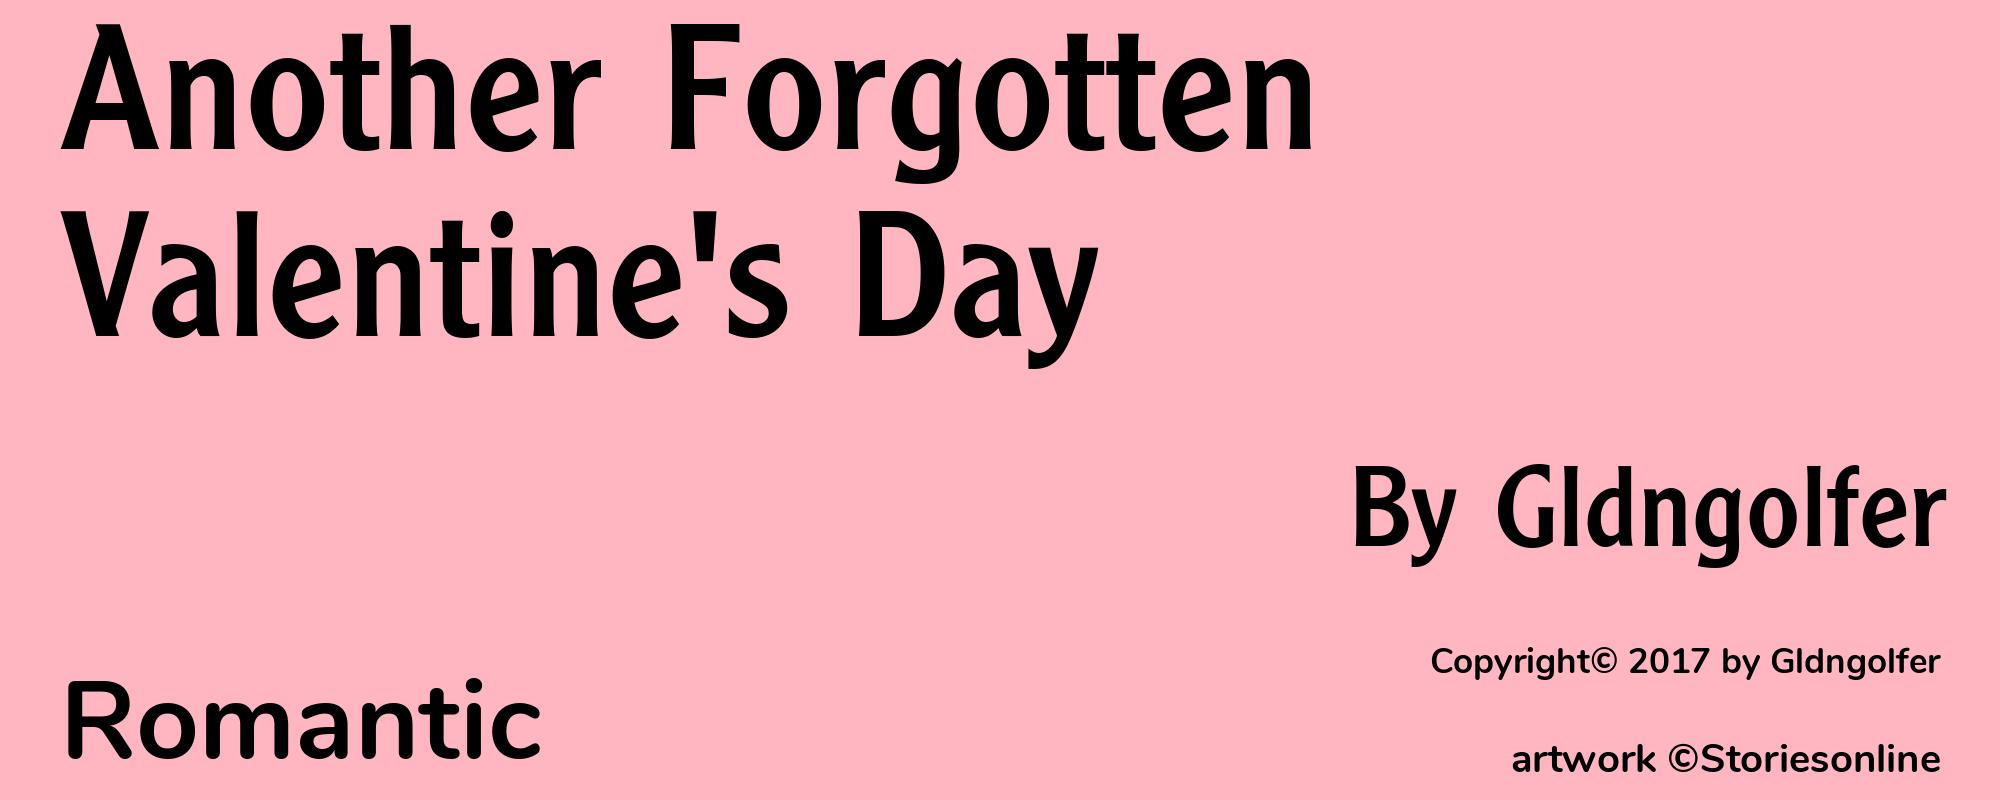 Another Forgotten Valentine's Day - Cover